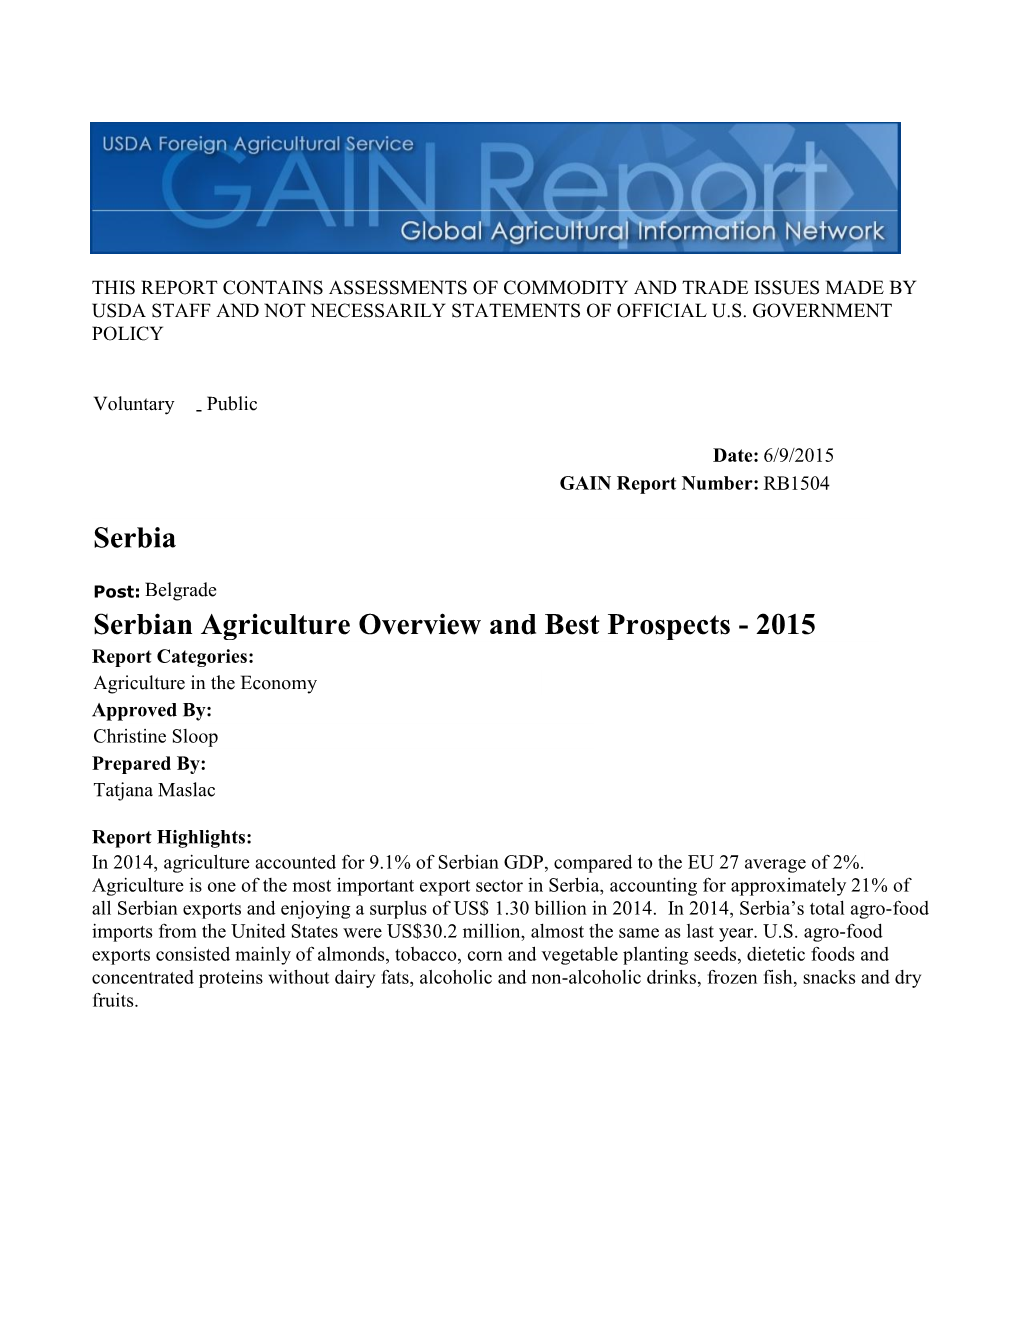 Serbian Agriculture Overview and Best Prospects - 2015 Report Categories: Agriculture in the Economy Approved By: Christine Sloop Prepared By: Tatjana Maslac